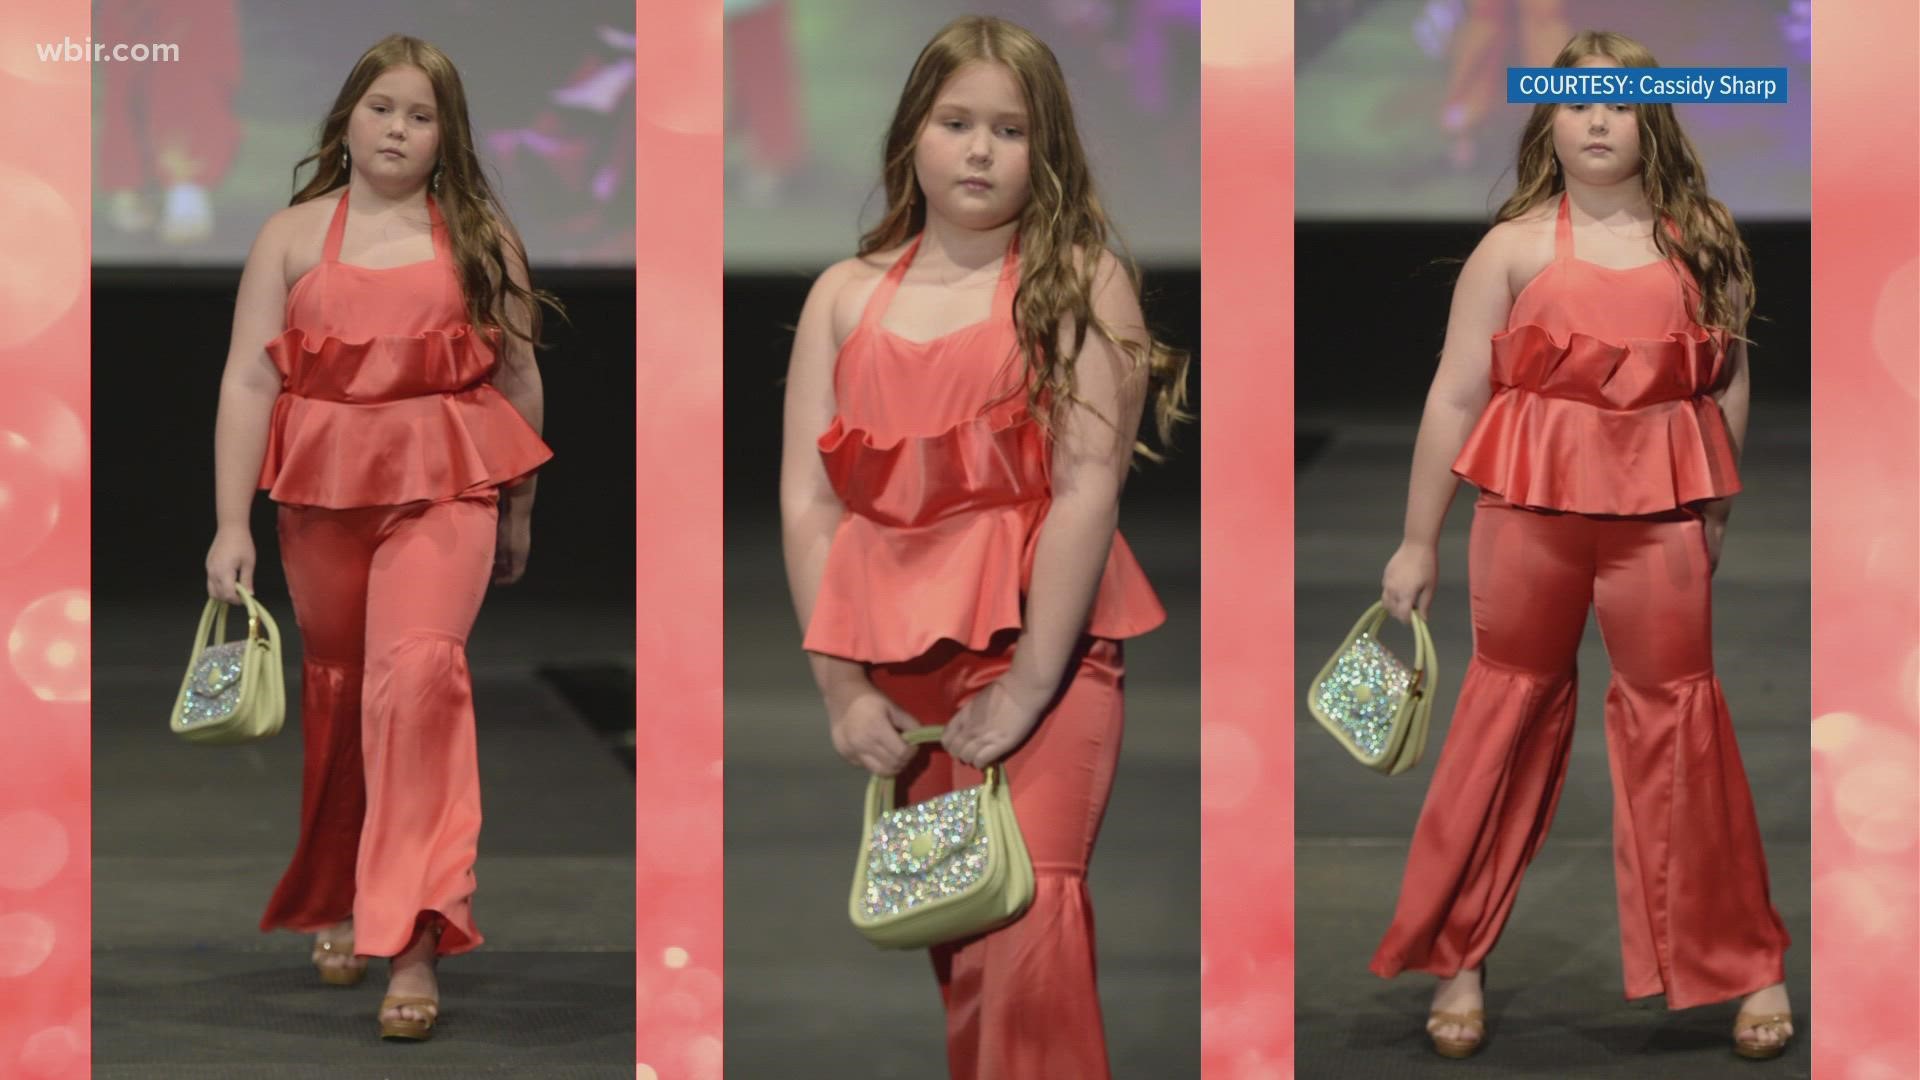 Piper Sharp, 9, hit the runway this September as a model for New York Fashion Week.